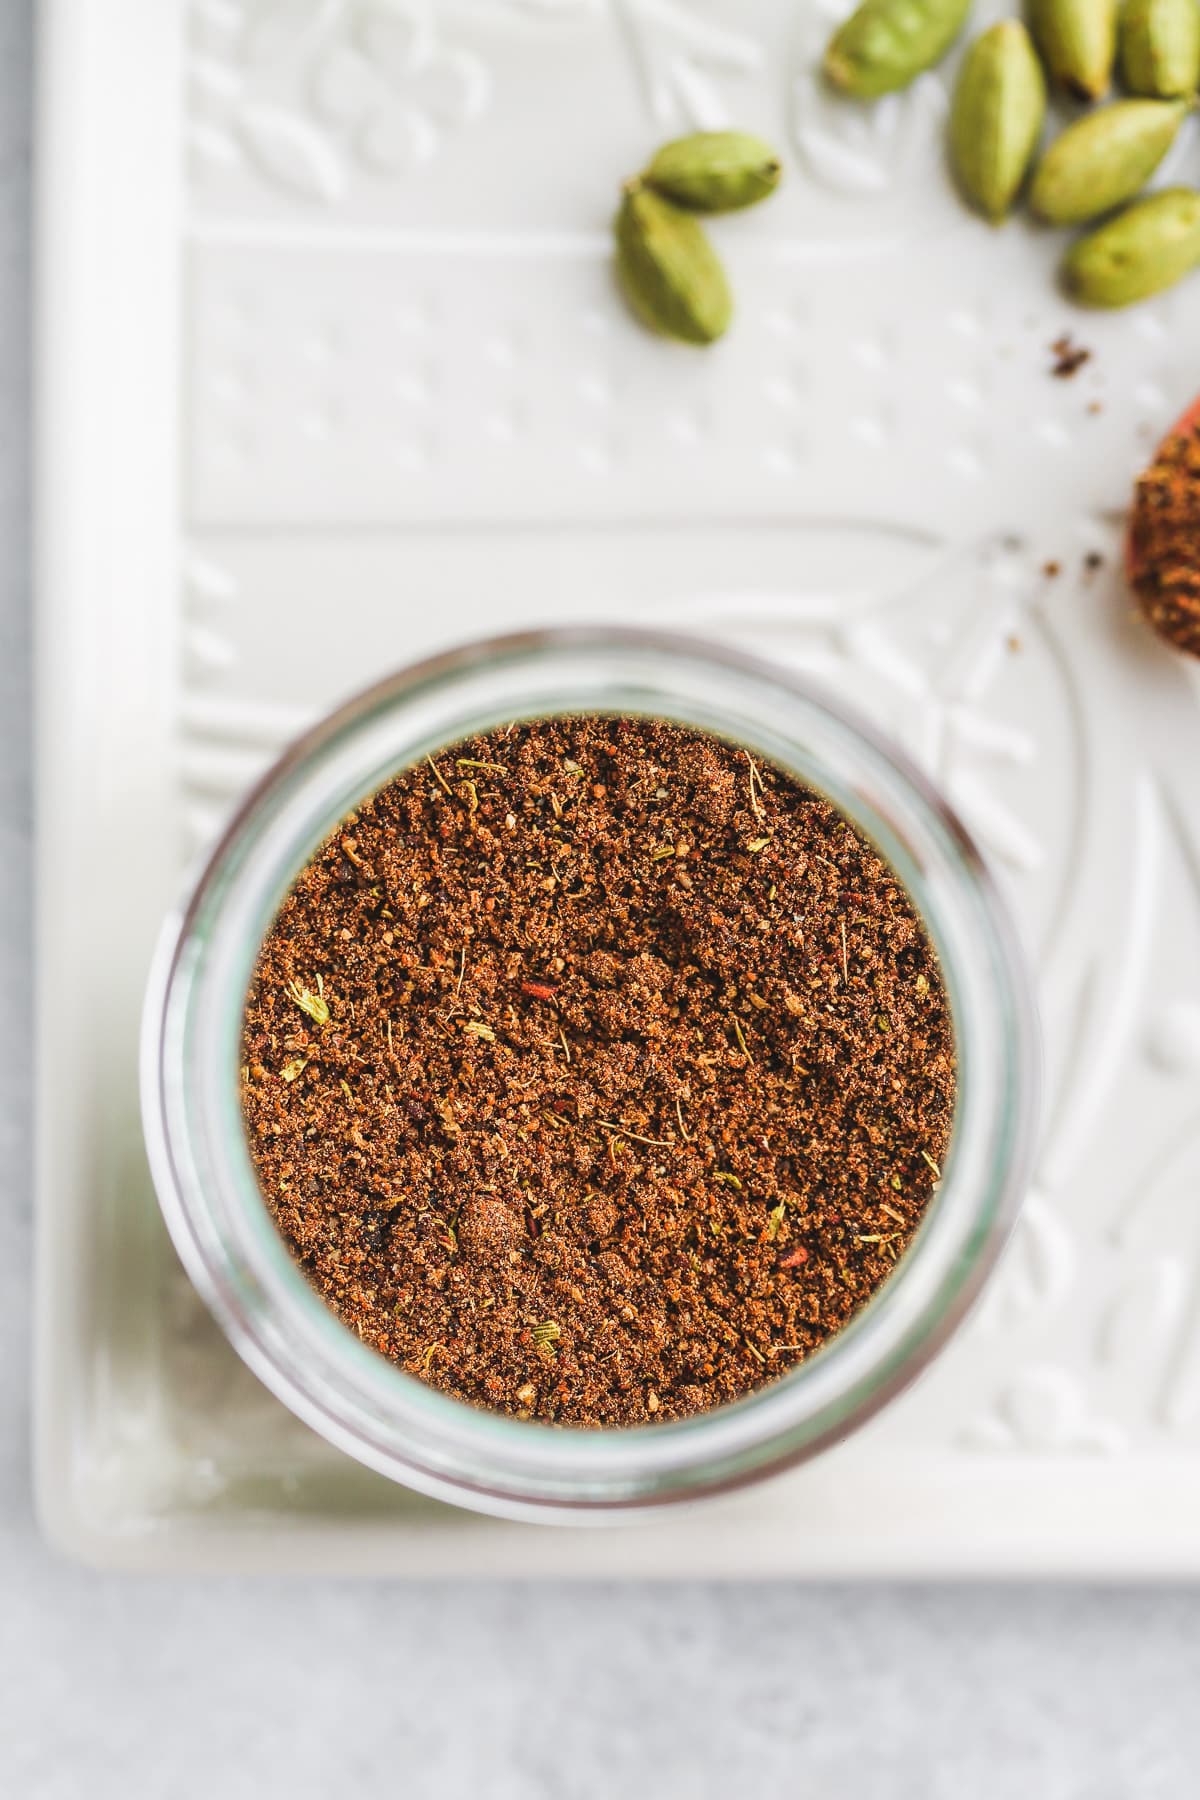 A close up of a baharat spice blend jar on a white glass try